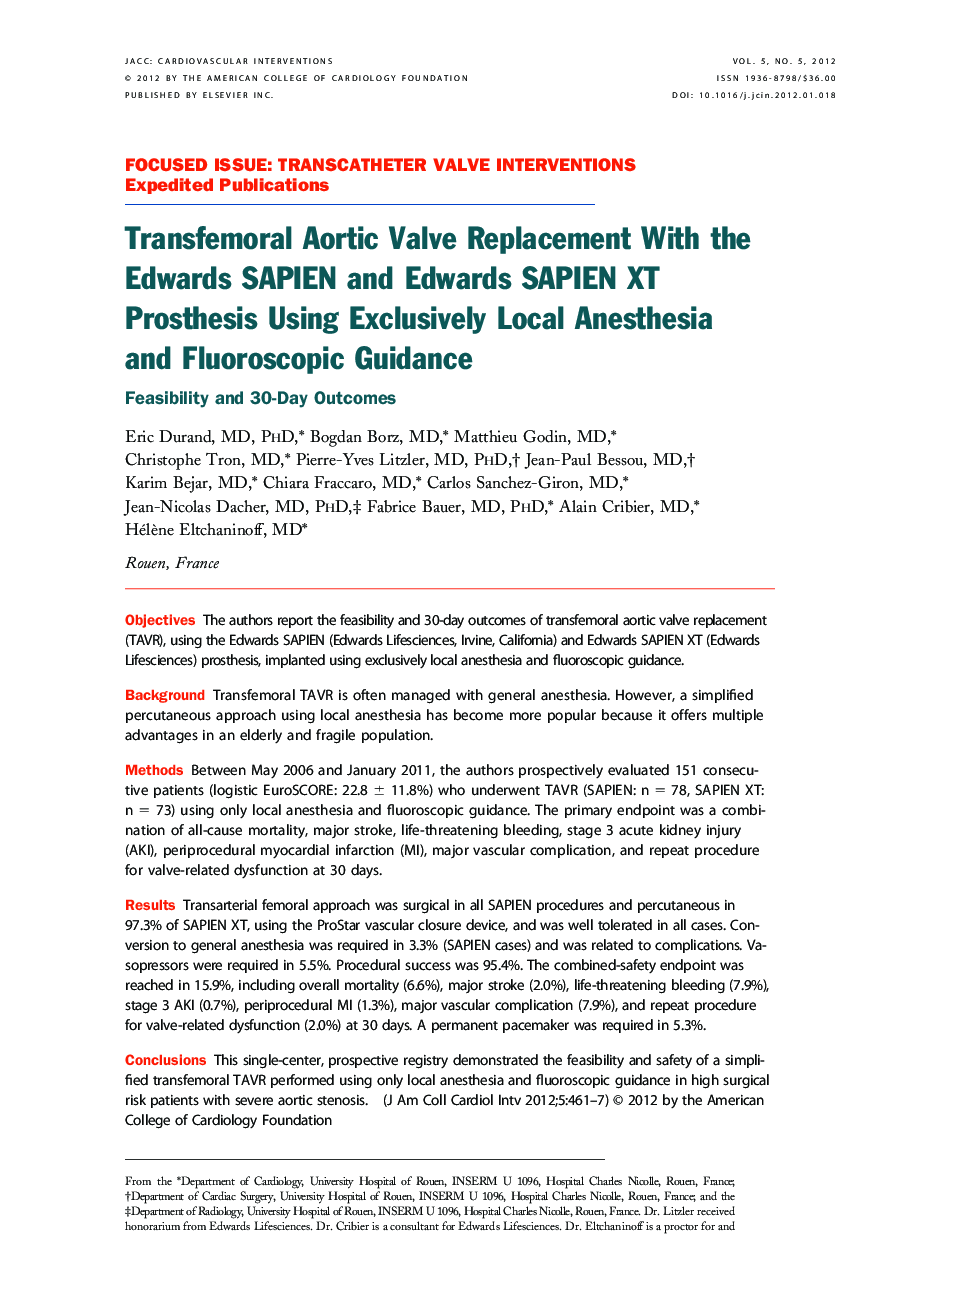 Transfemoral Aortic Valve Replacement With the Edwards SAPIEN and Edwards SAPIEN XT Prosthesis Using Exclusively Local Anesthesia and Fluoroscopic Guidance: Feasibility and 30-Day Outcomes